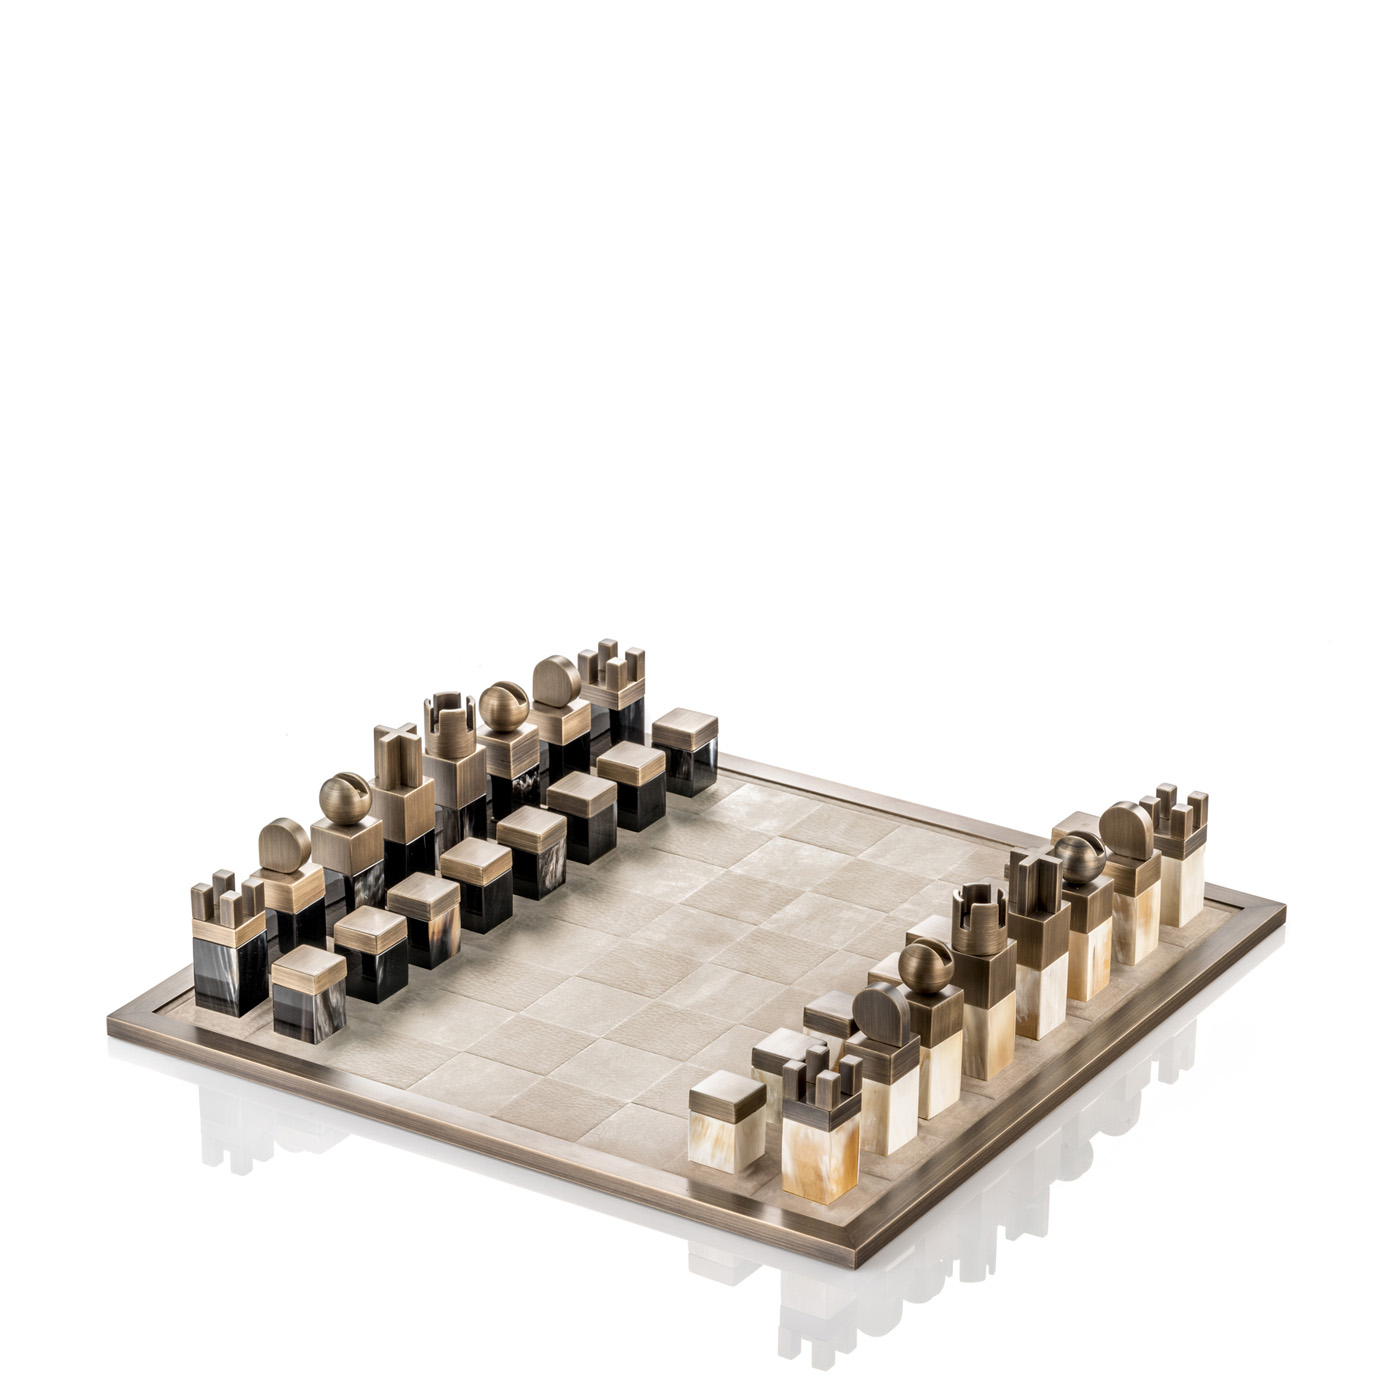 Gaming tables - Trafalgar chess set in nabuk leather and horn - Arcahorn